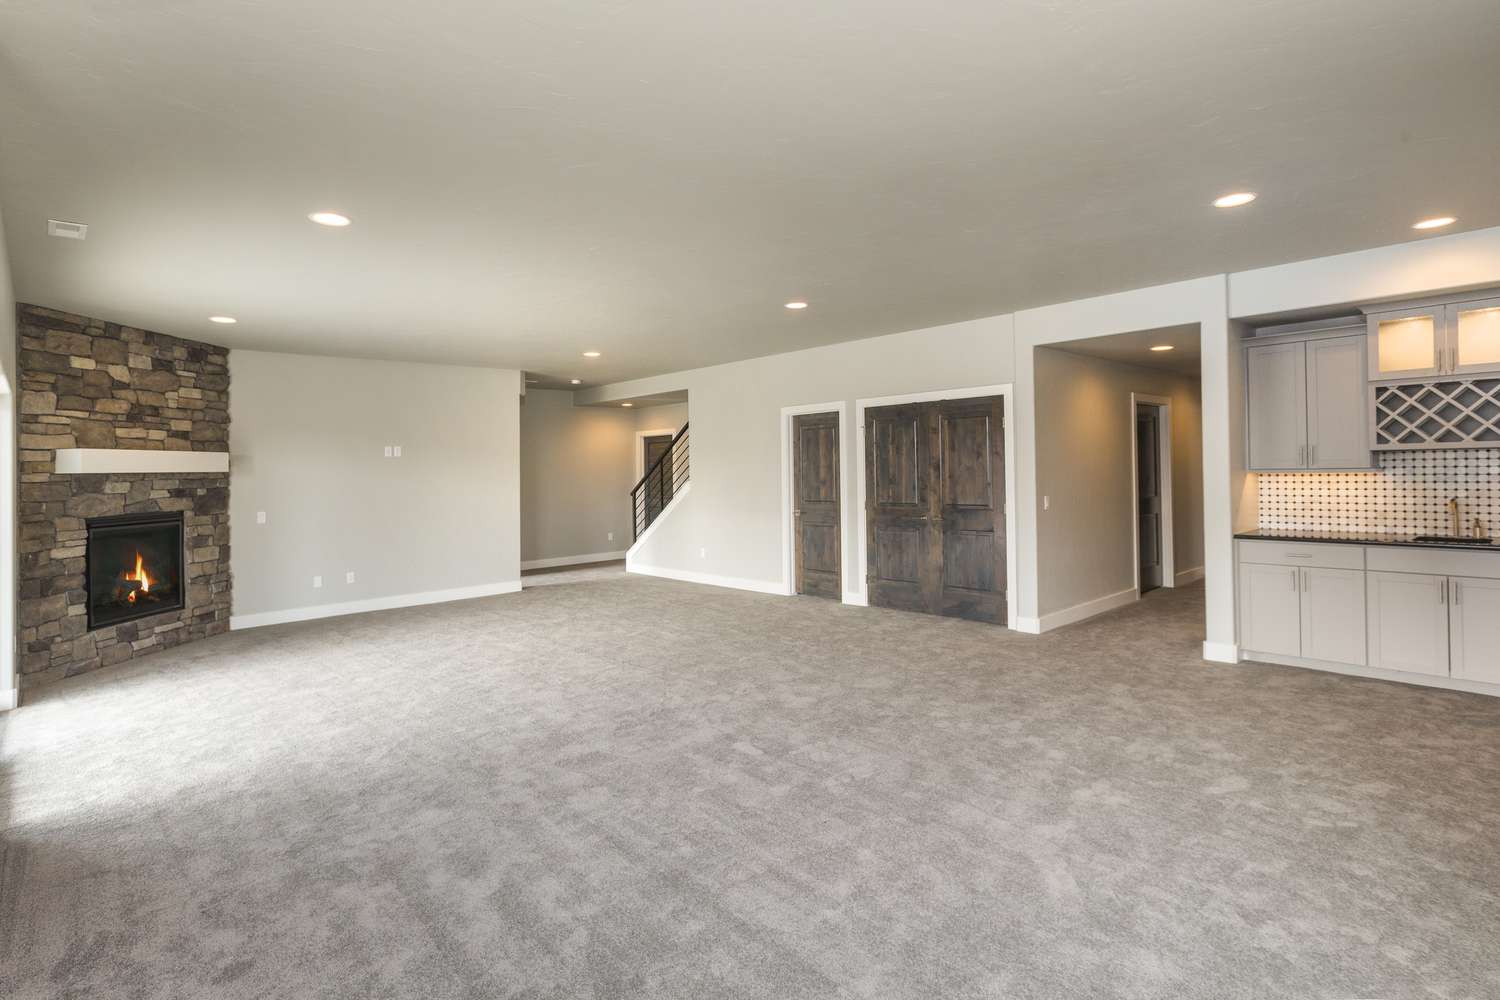 How To Put Carpet In Basement